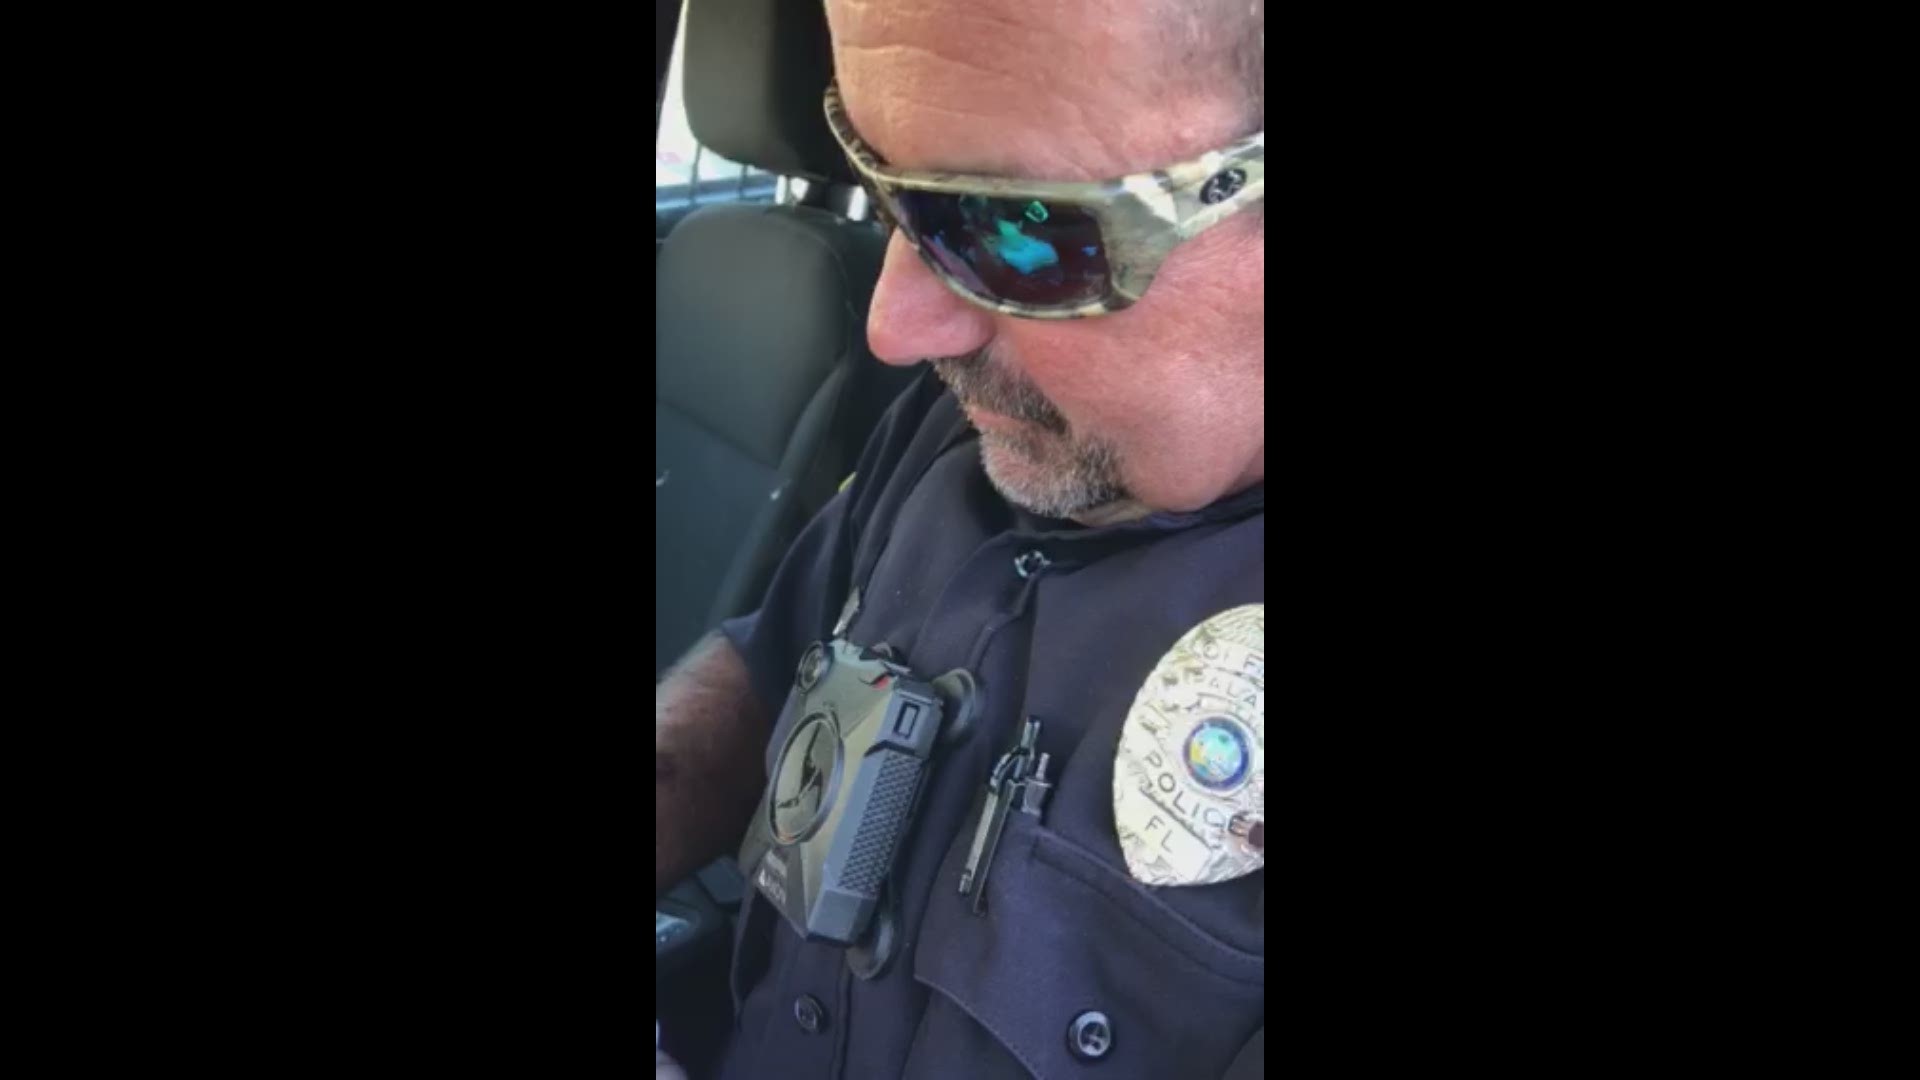 WATCH: Palatka Police Officer signing off after 15 years of service, sons thank him over dispatch